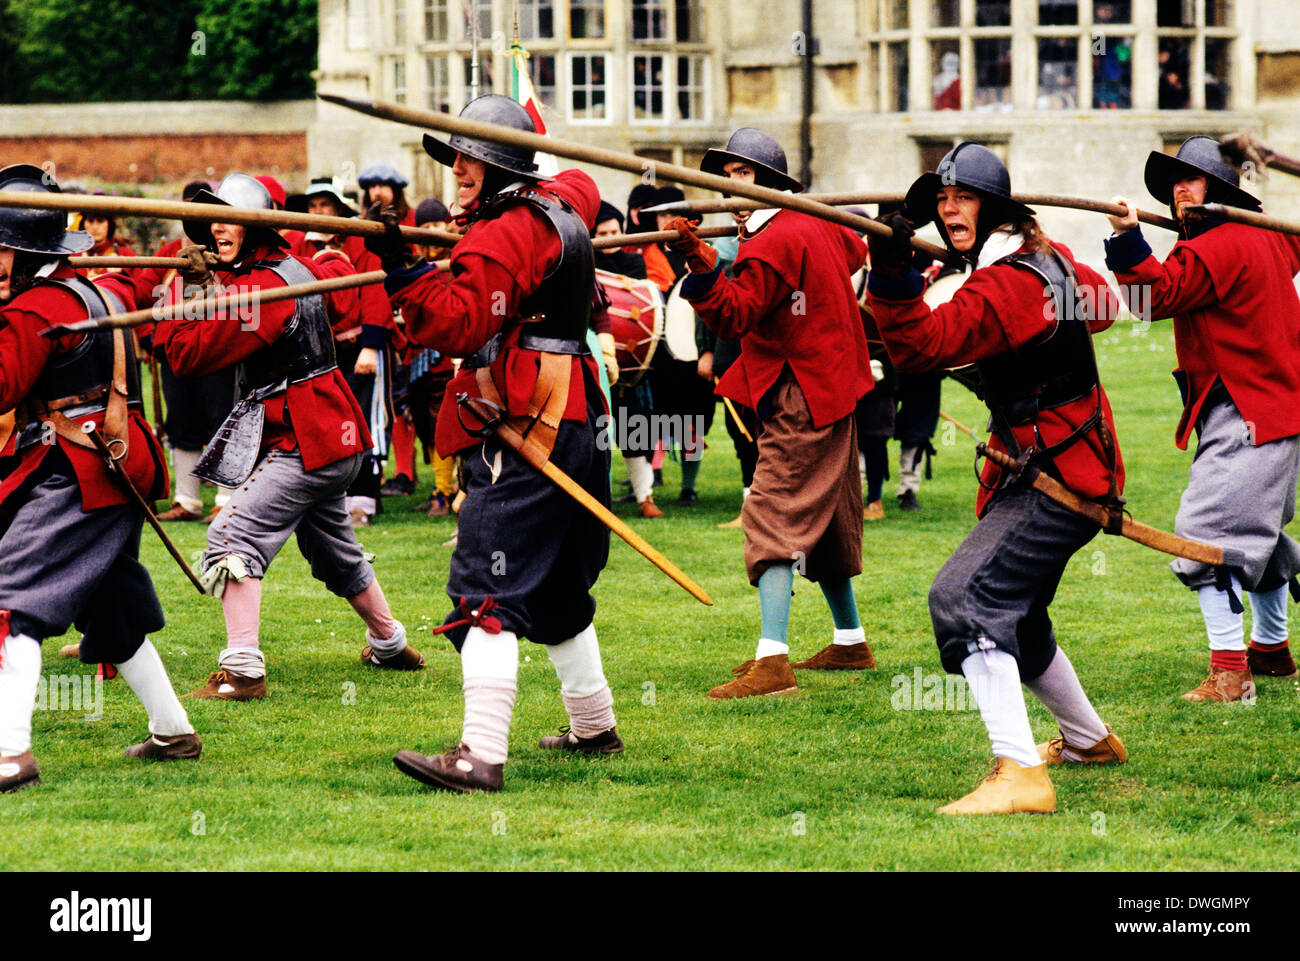 English Civil War, Pikemen, 17th century, historical re-enactment, soldier soldiers advancing in battle order with pikes military iniform uniforms England UK Stock Photo